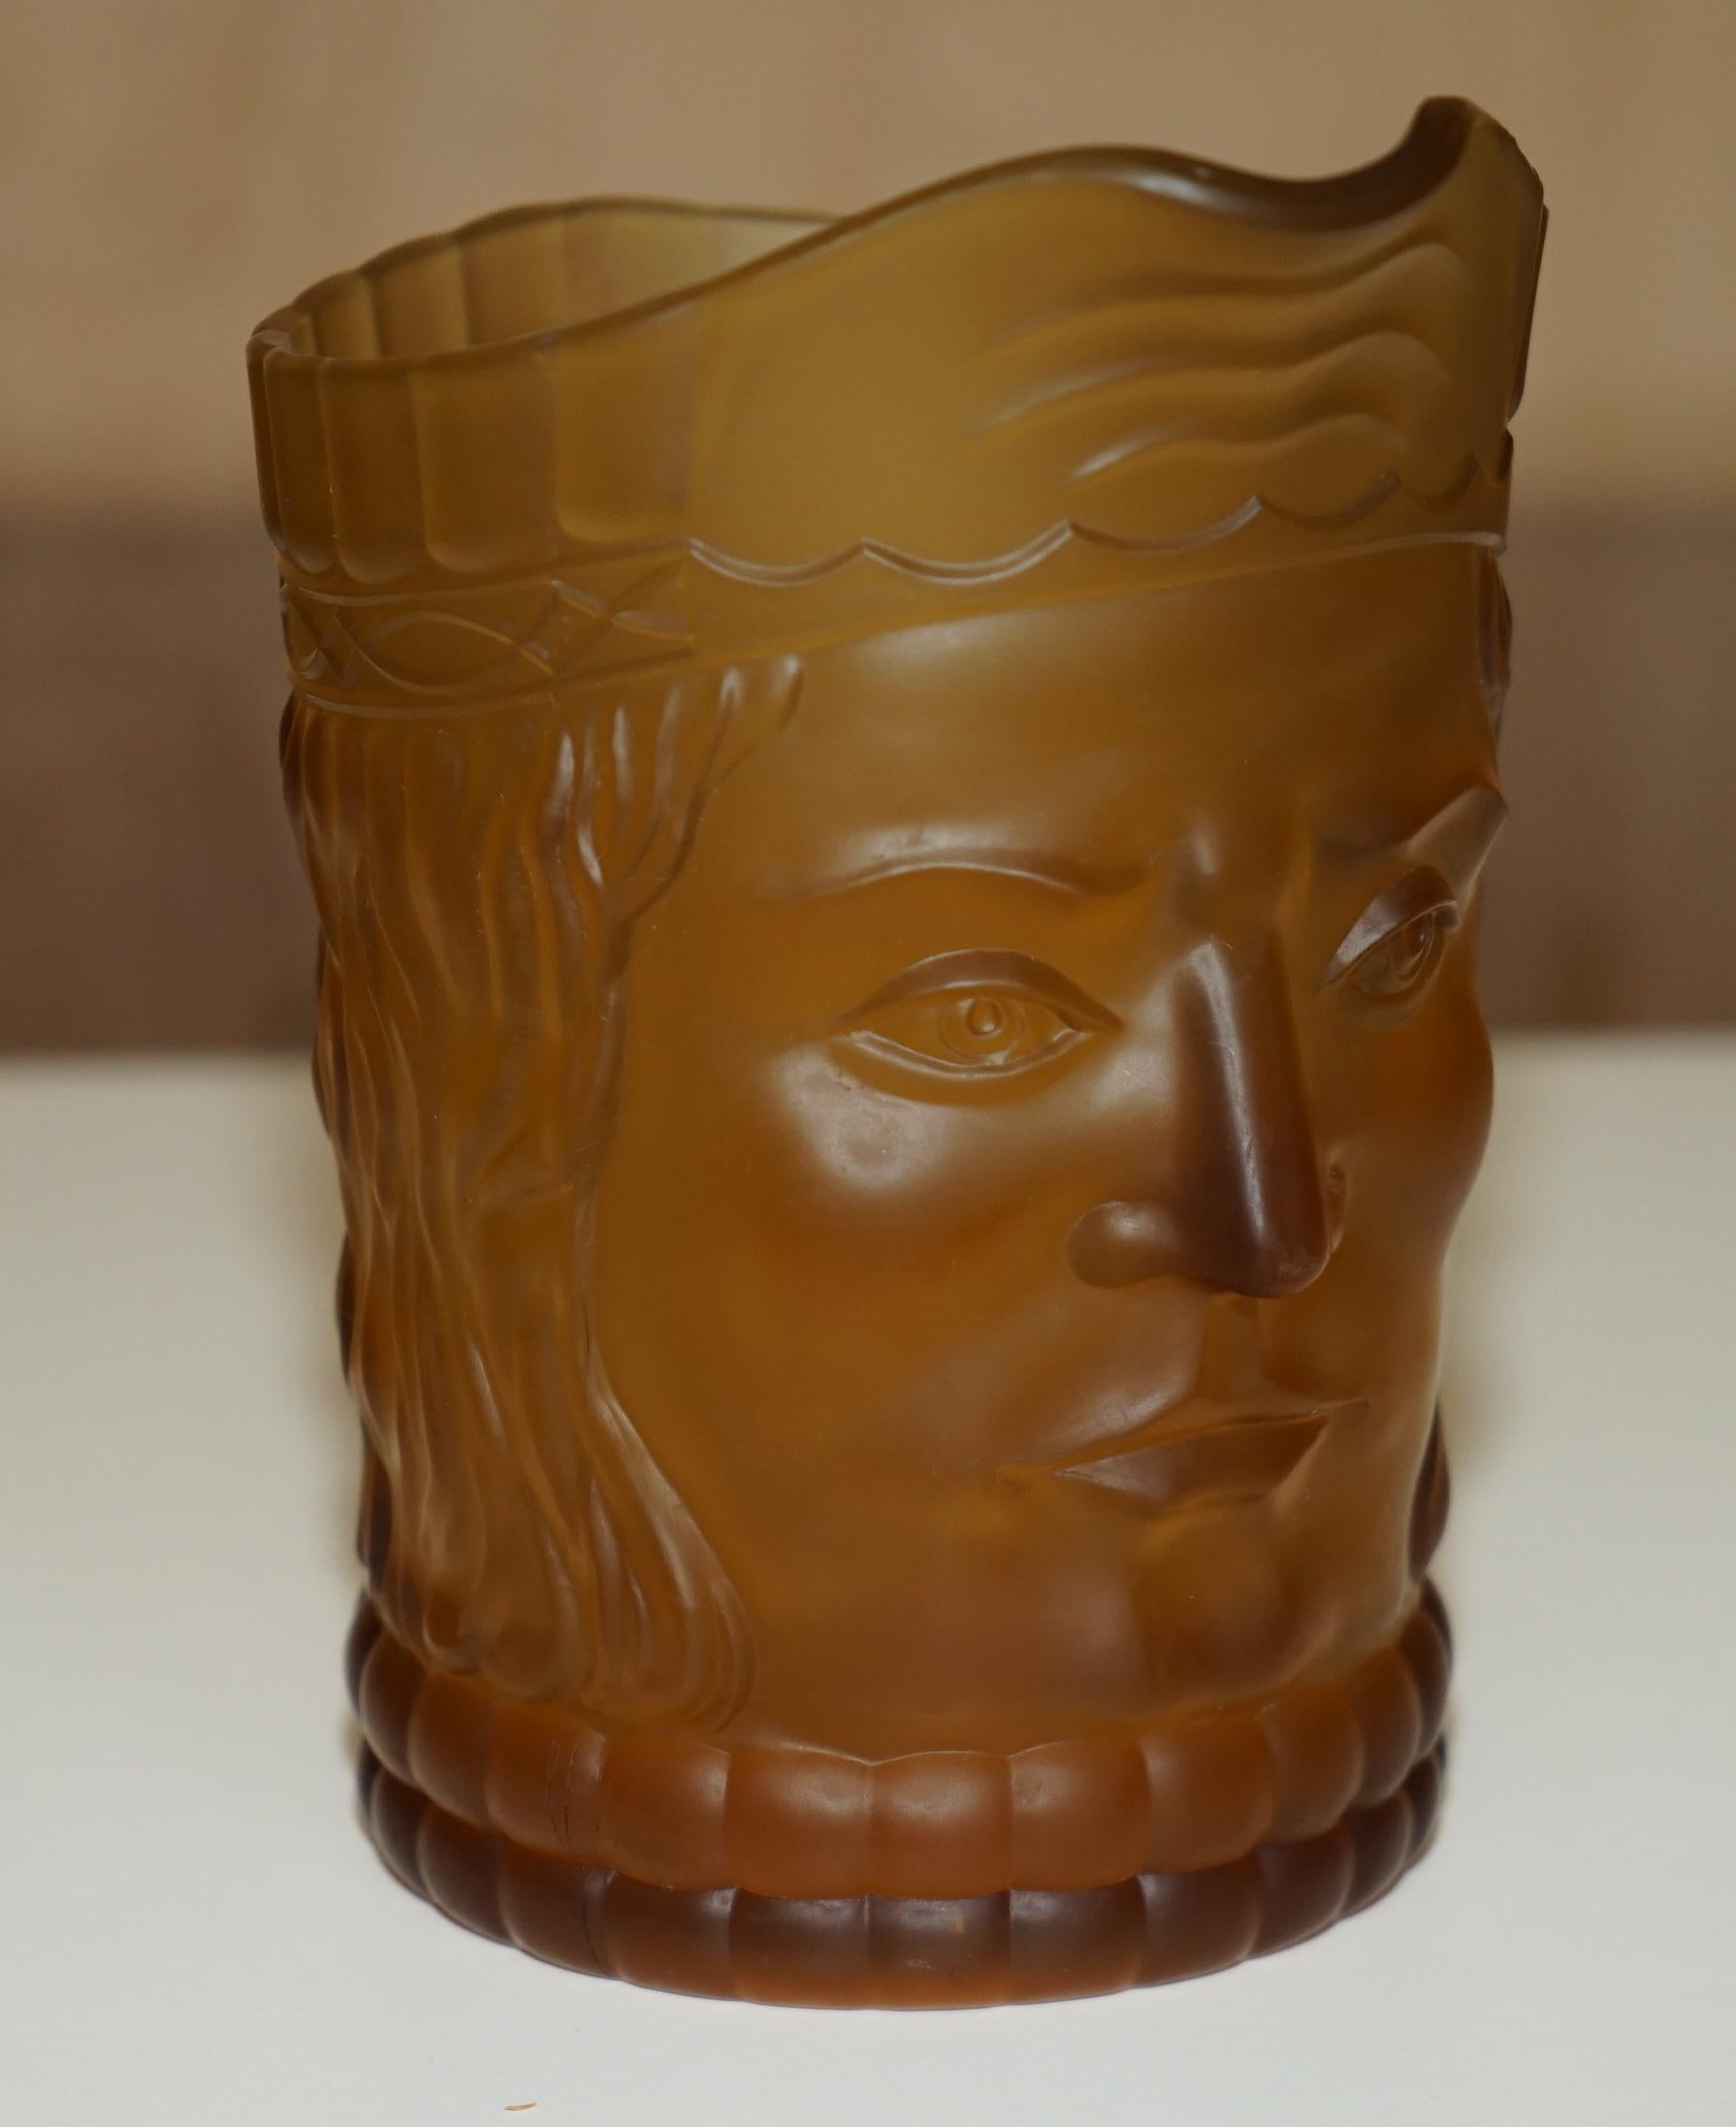 Royal House Antiques

Royal House Antiques is delighted to offer for sale this lovely circa 1920's Amber glass suite of five cups and one larger pitcher jug each depicting a primitive looking face

This is a very well made and decorative suite, I